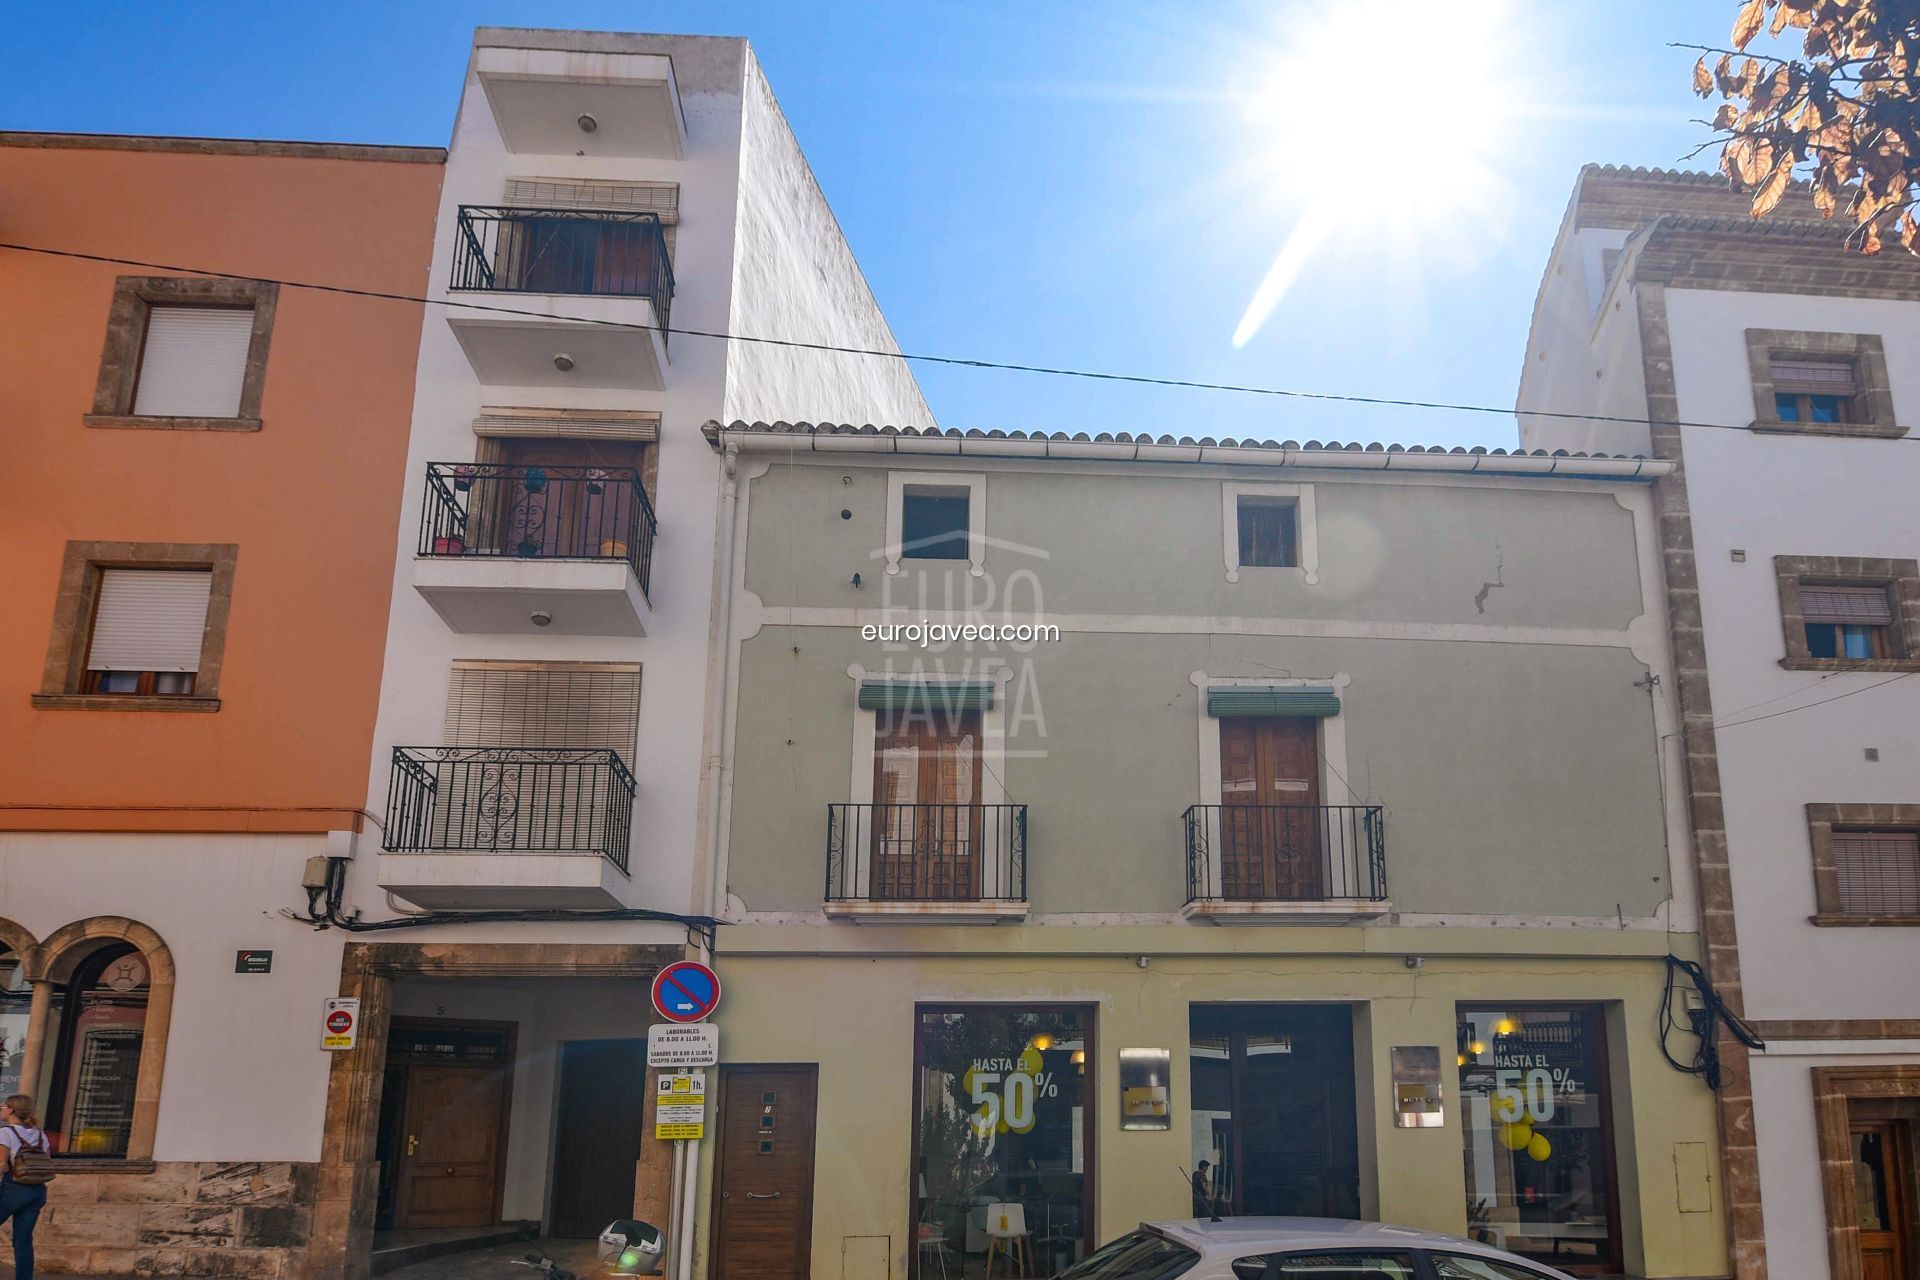 Charming Apartment for sale in Jávea , to renovate in the center of the old town .